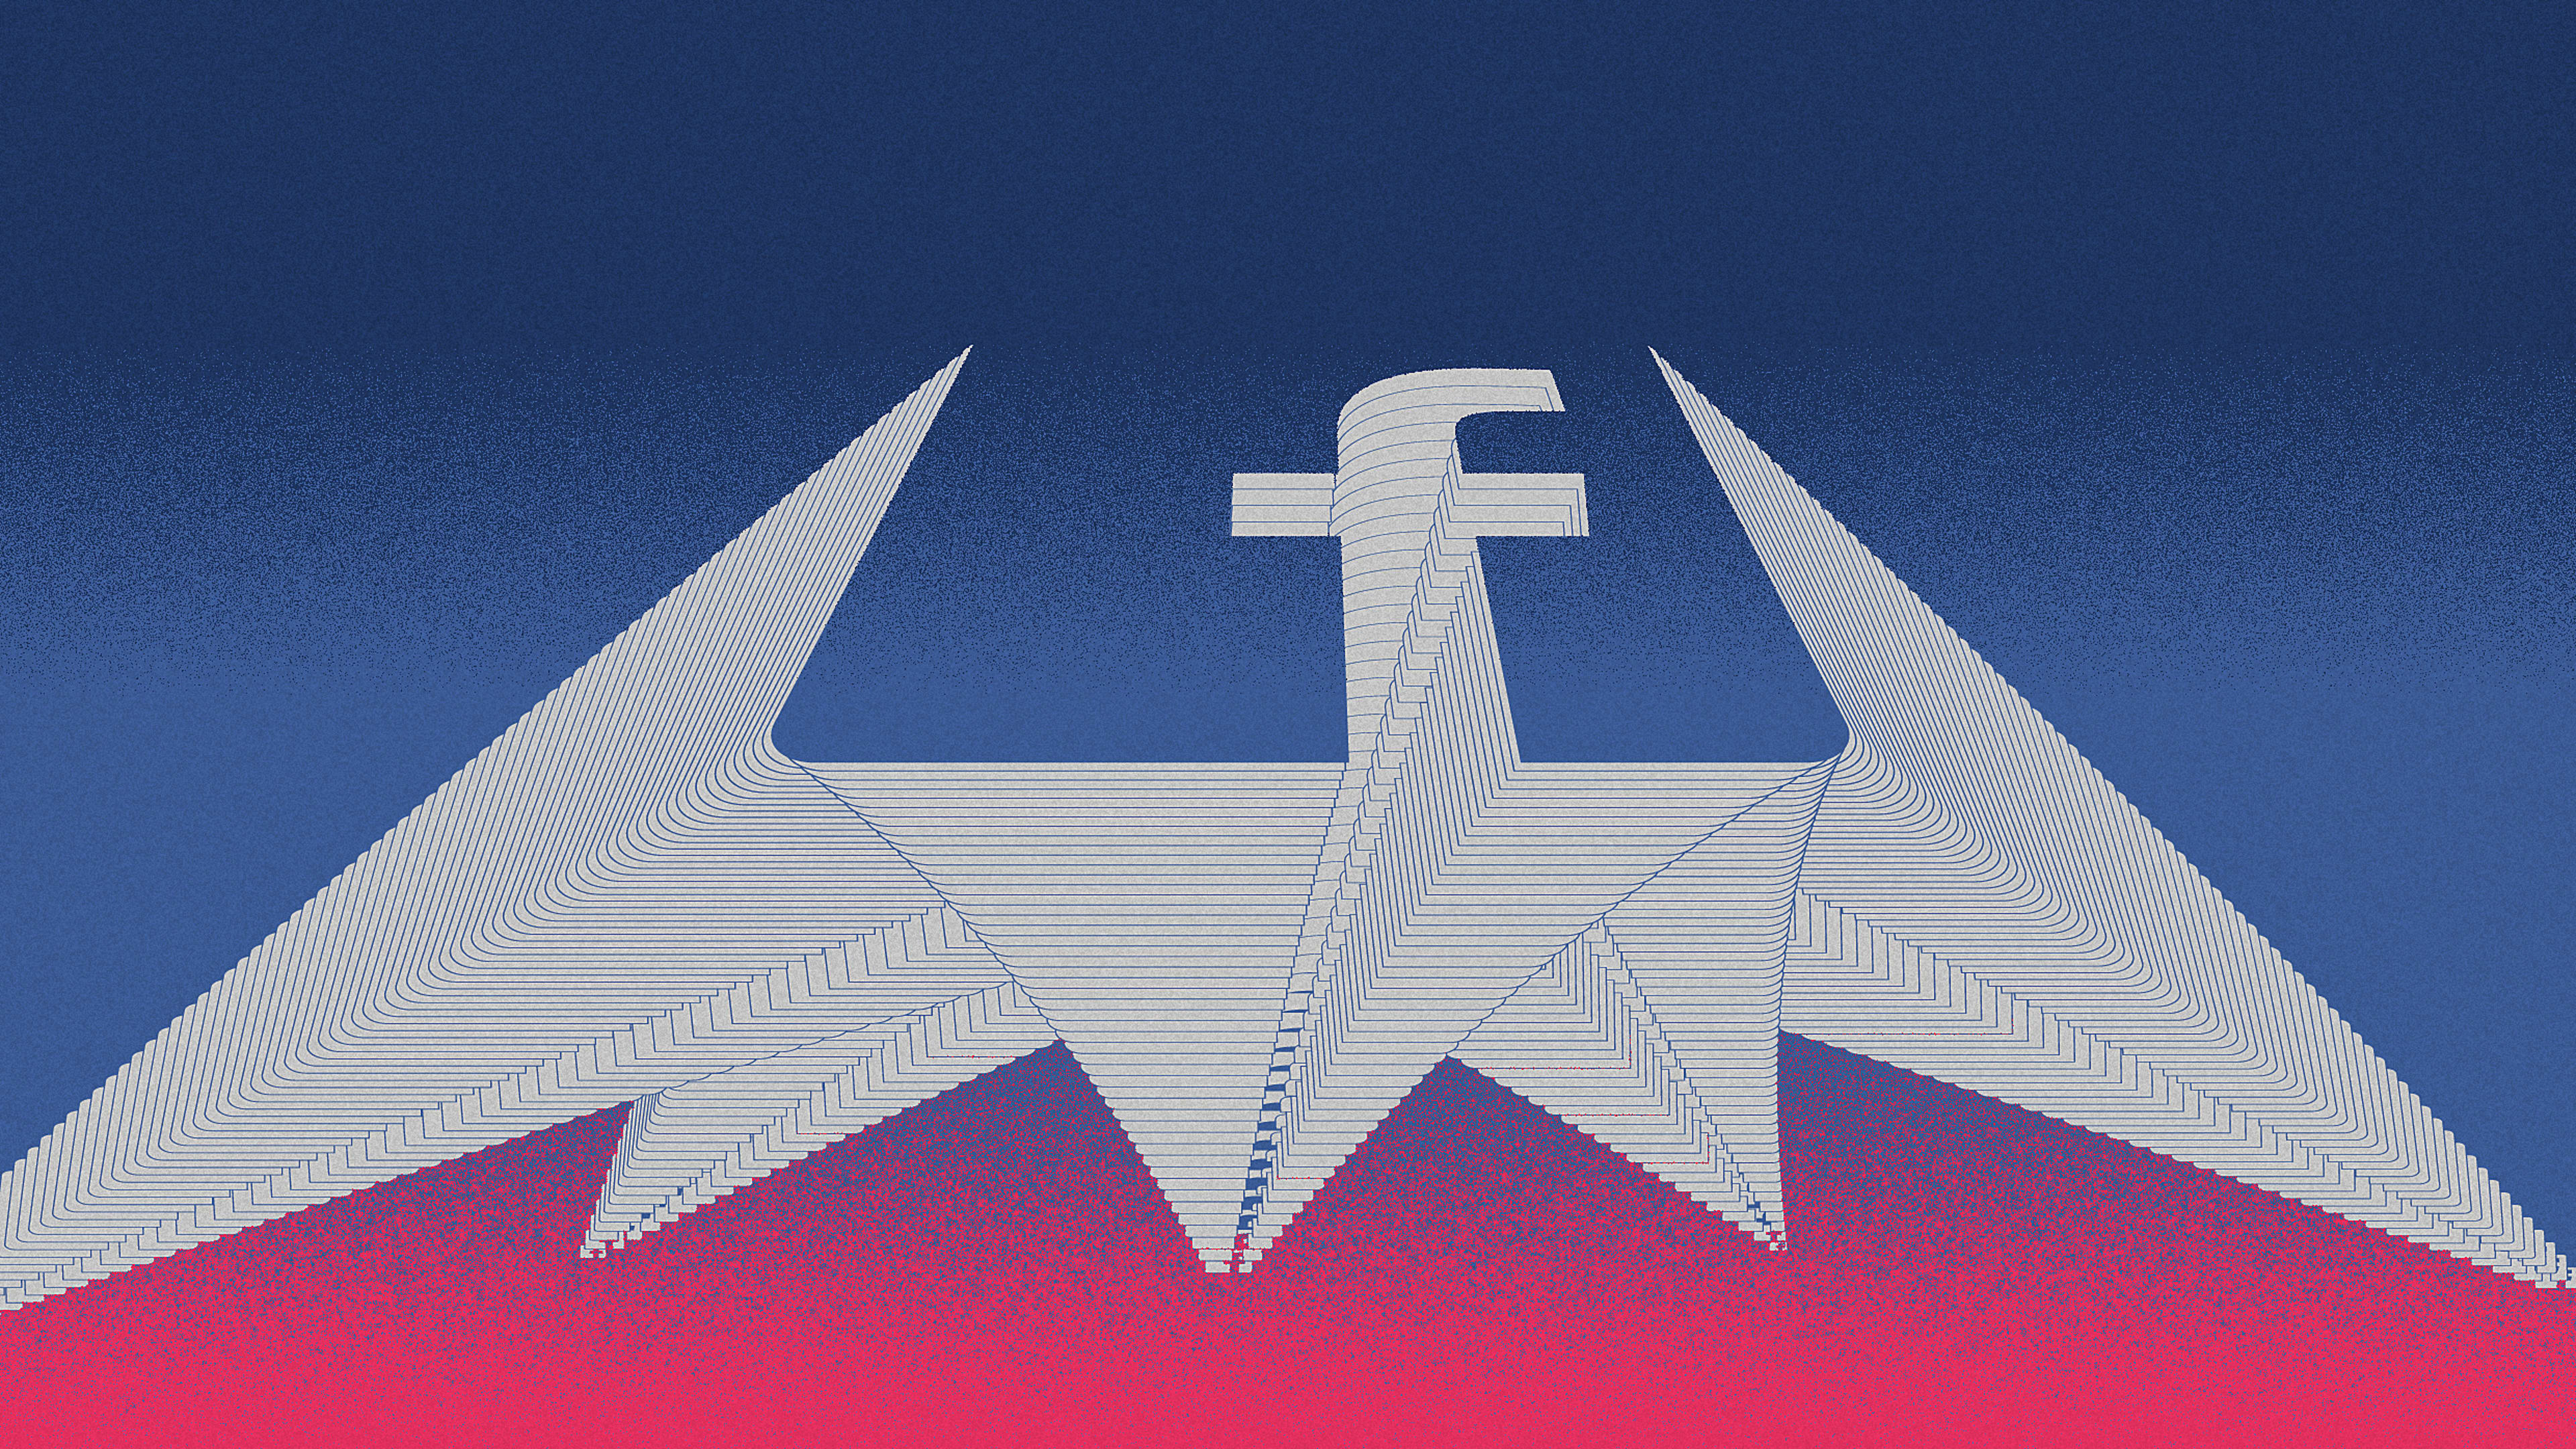 How Facebook can make up for disinformation and help get everyone vaccinated for COVID-19